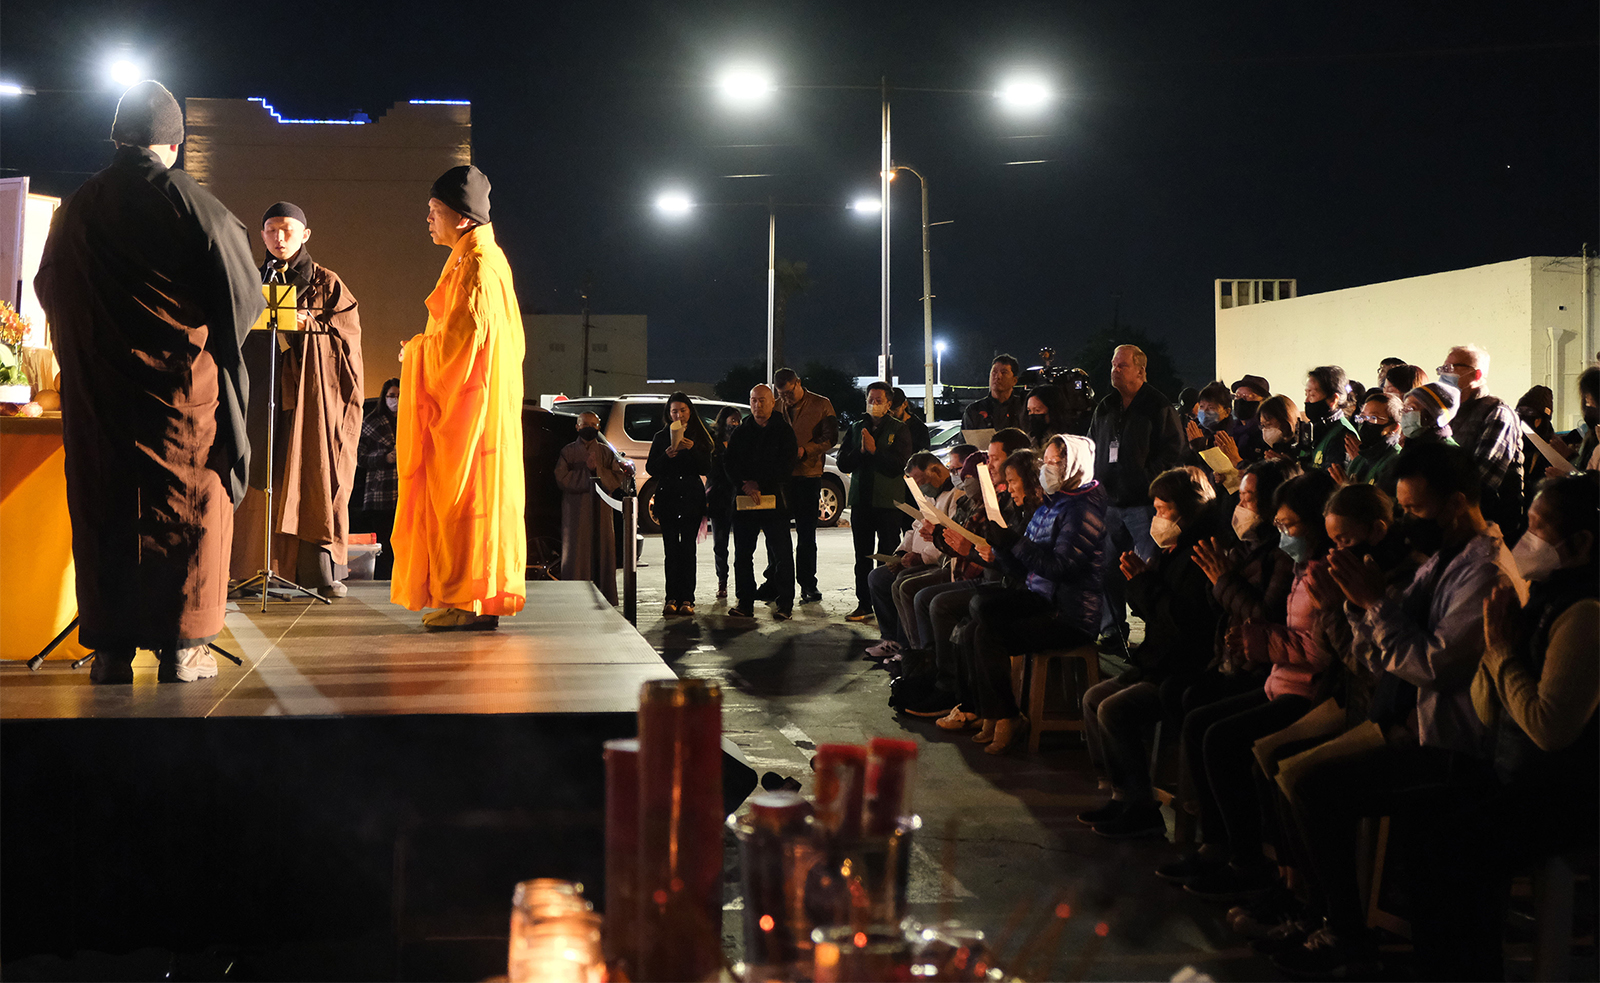 A solemn Buddhist ceremony offers comfort, healing at site of Monterey Park shooting